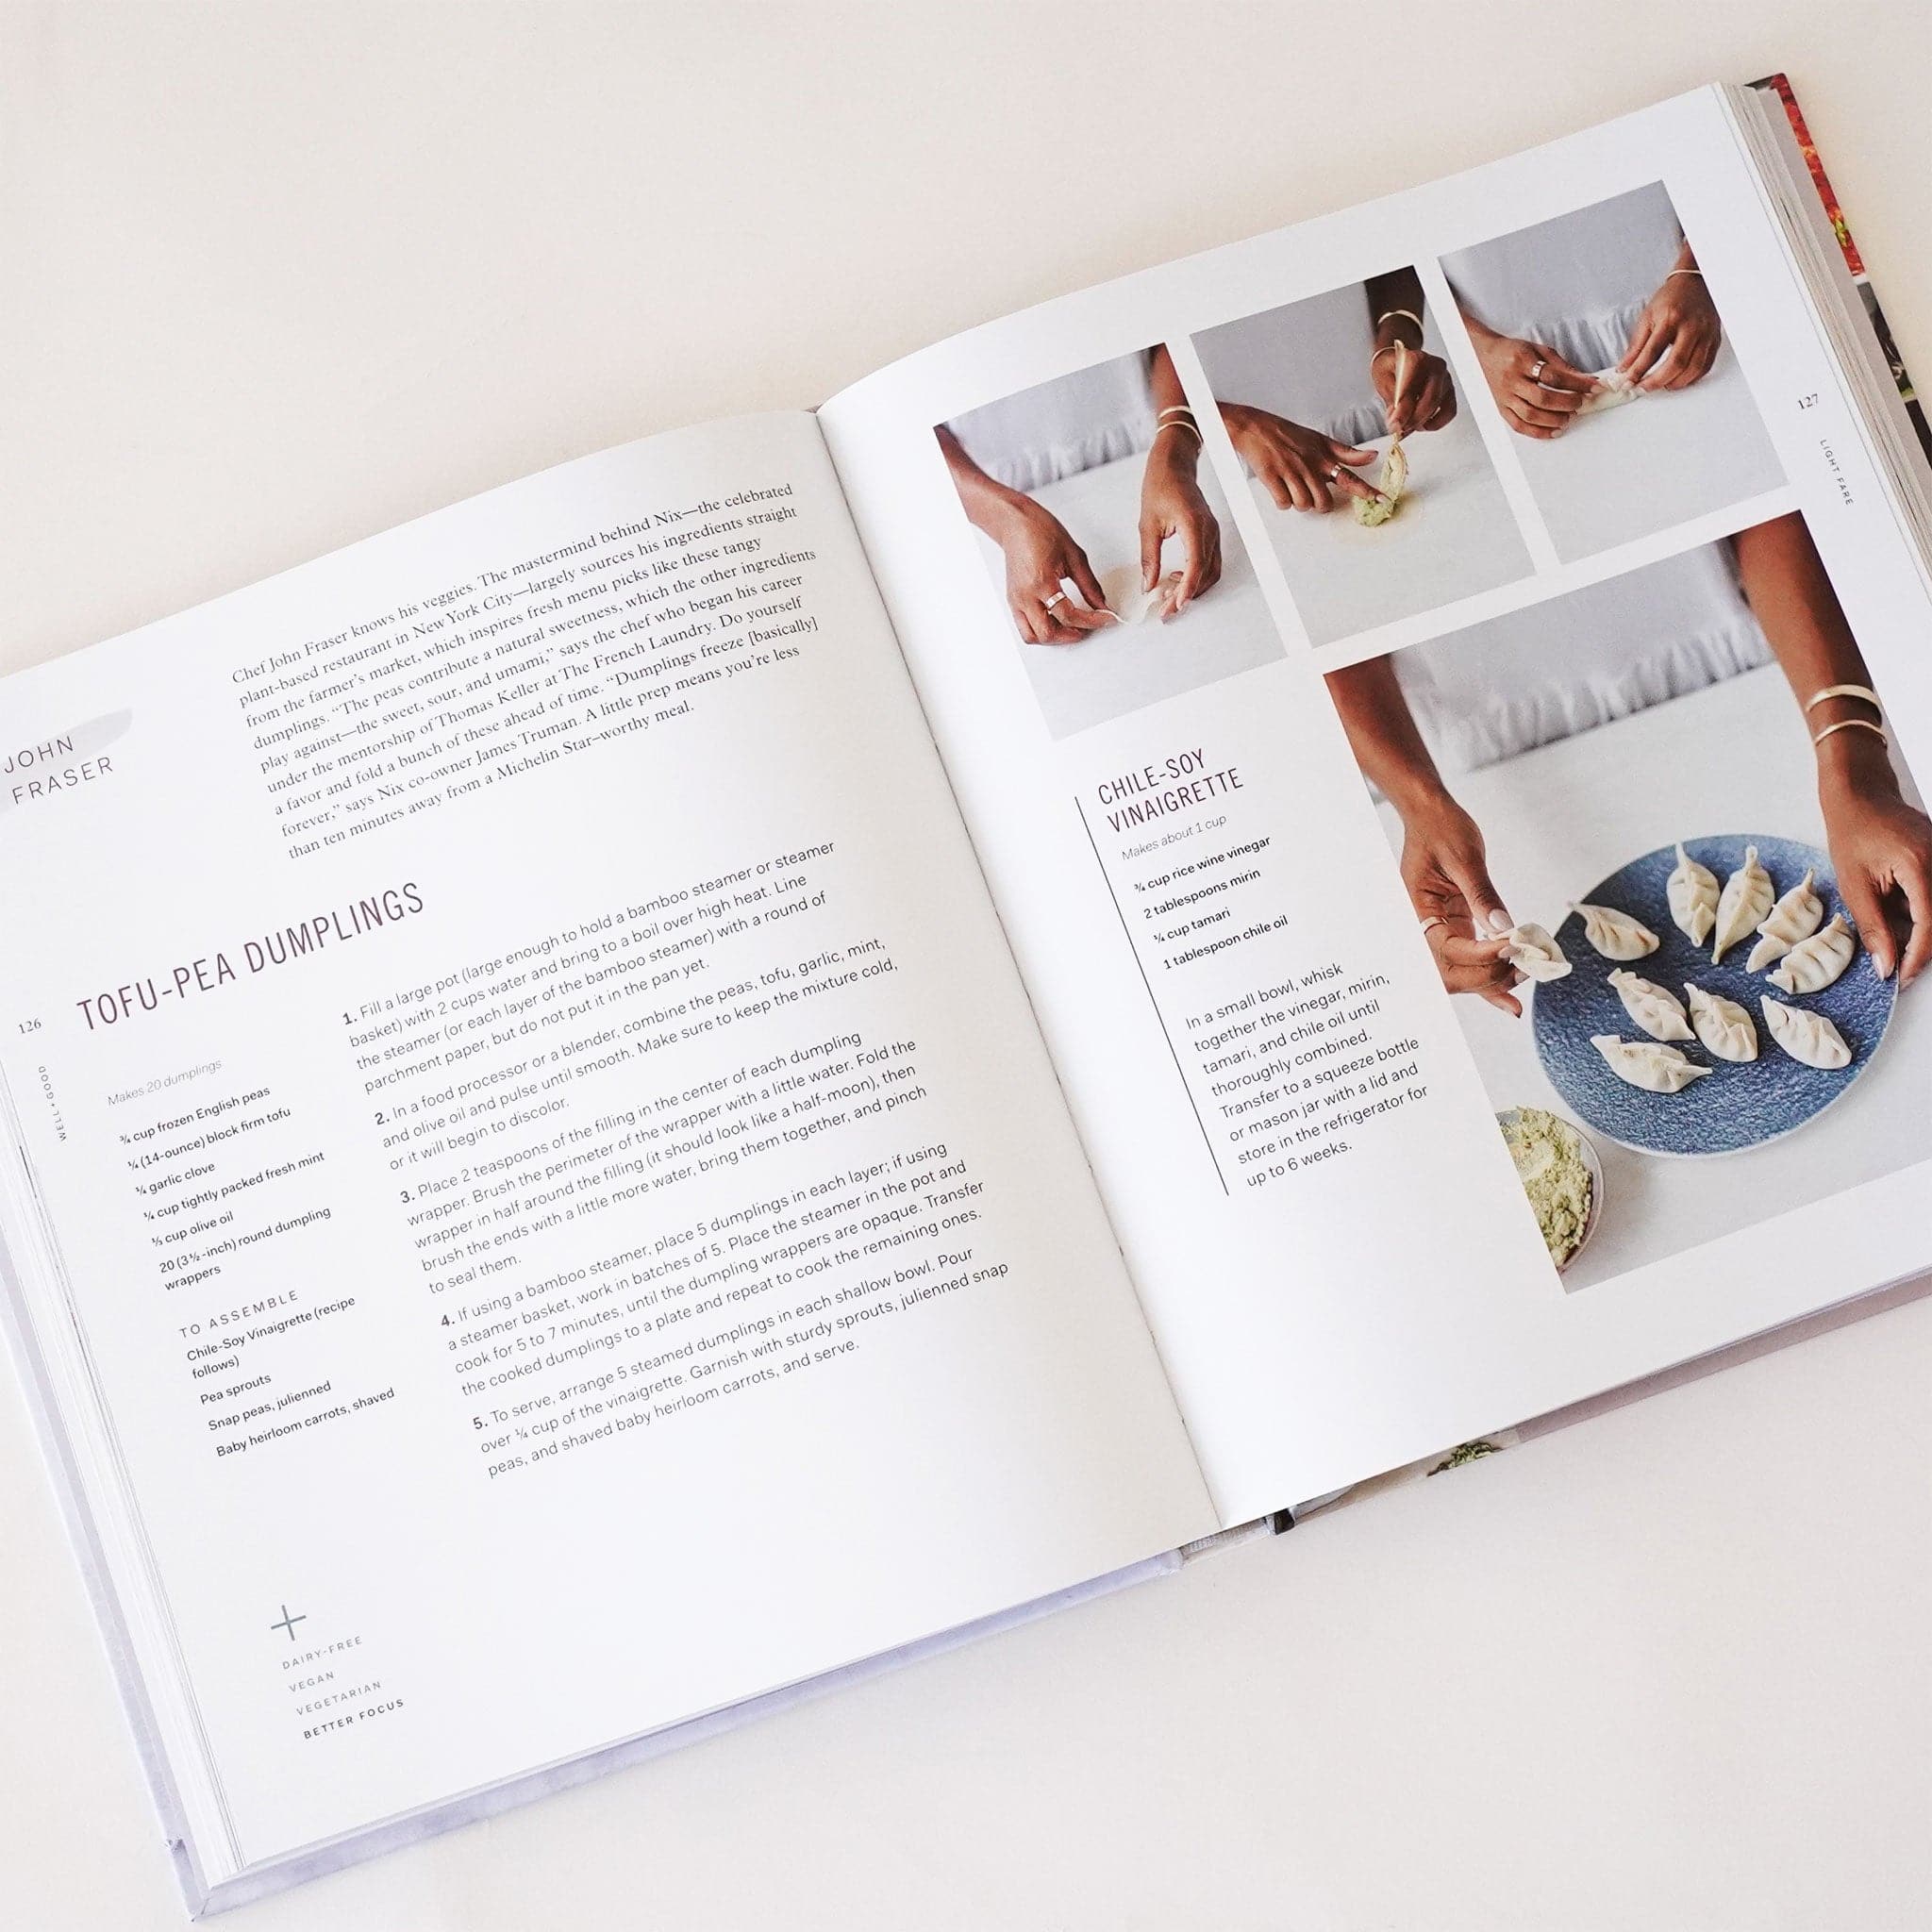 Cookbook open to two pages. To the left is instructions on how to make tofu-pea dumplings and to the right are step by step images to assist with the recipe. 